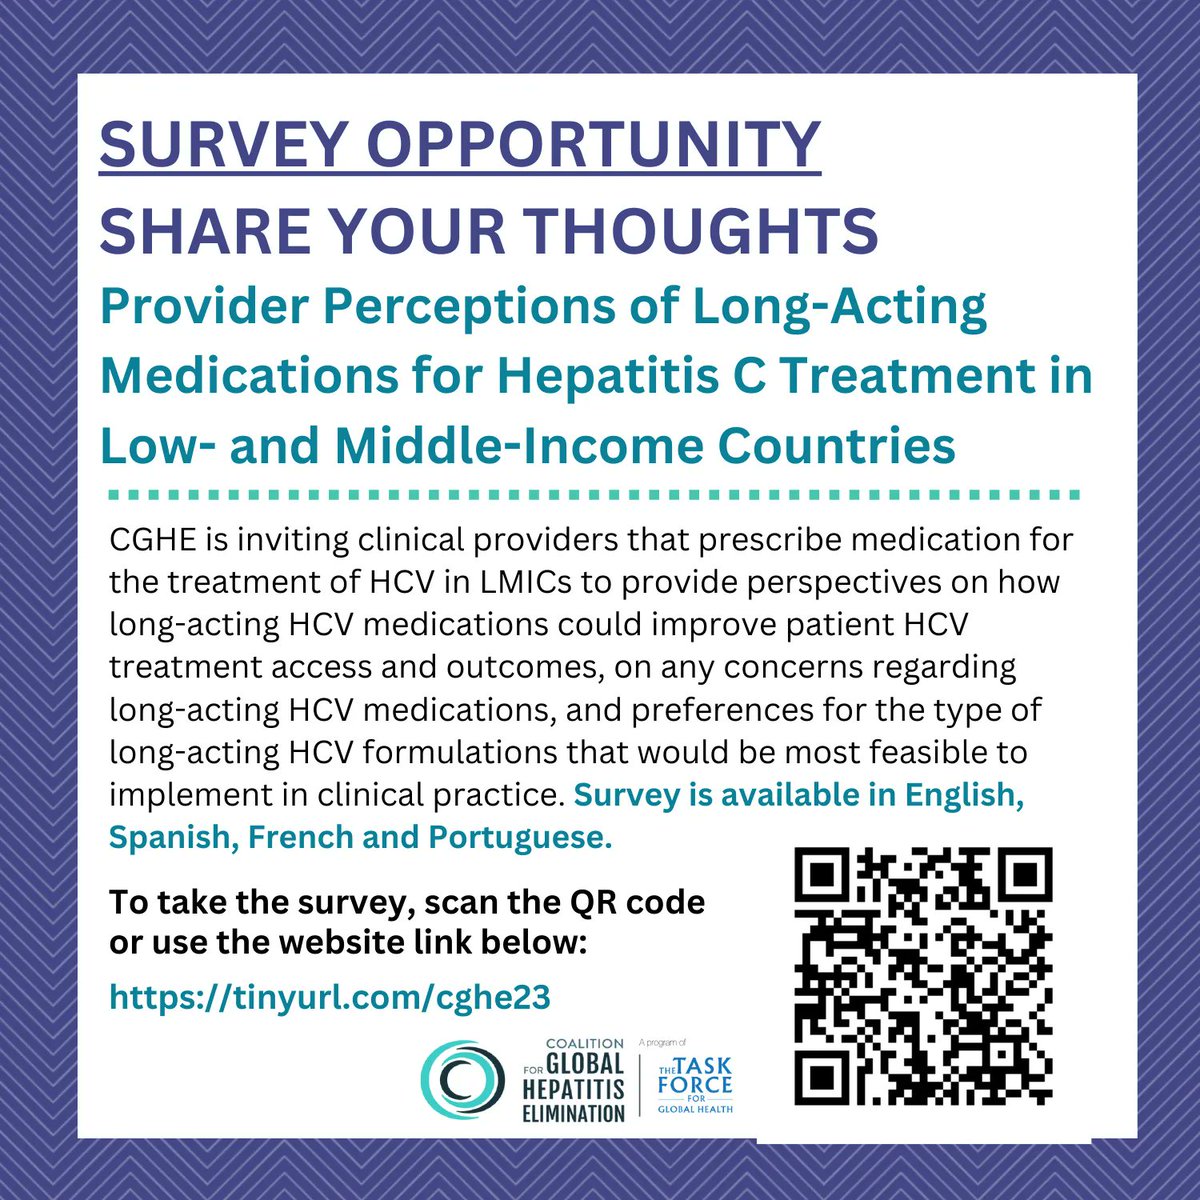 GlobalHep: NEW SURVEY! We’re seeking provider perspectives on how long-acti...